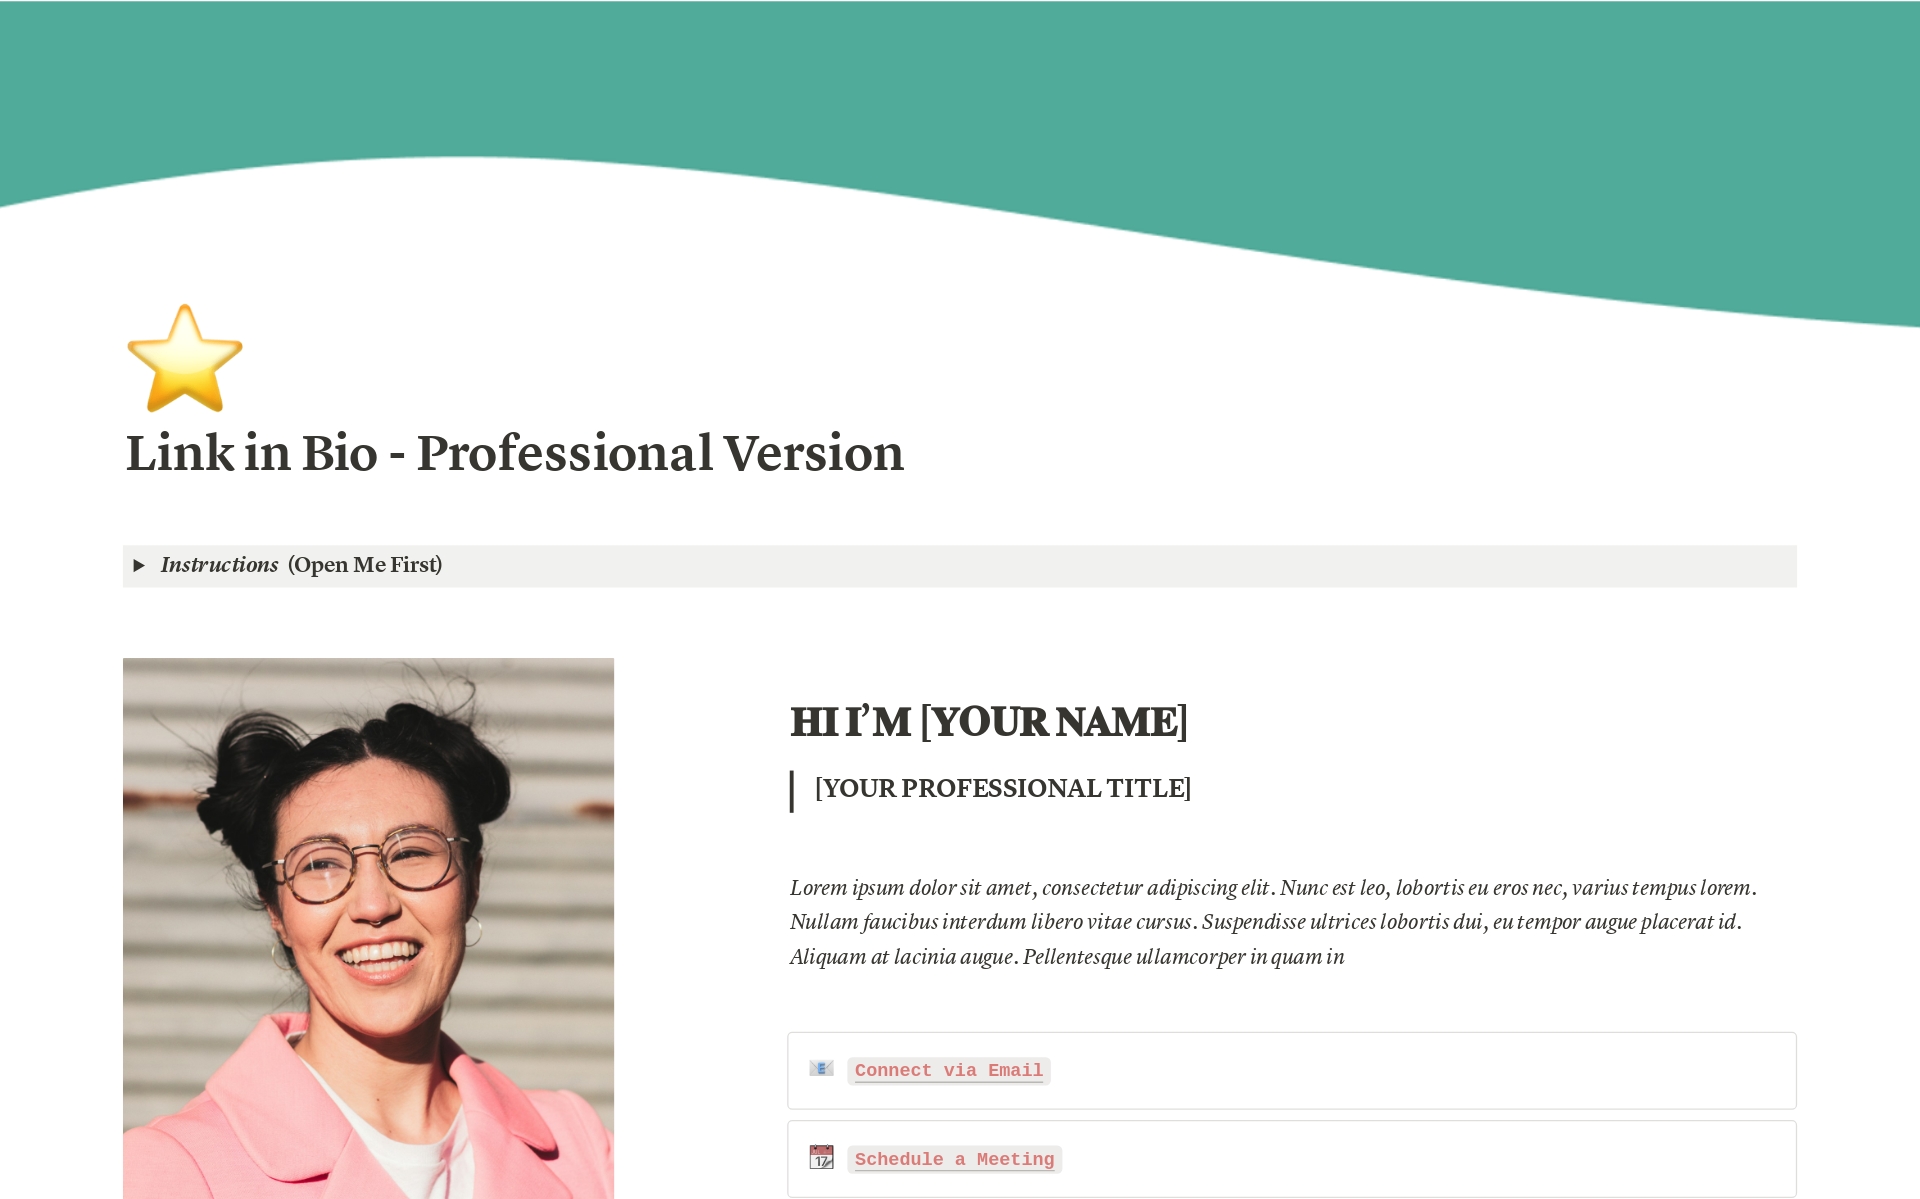 If you are a digital creator, a small business owner, a professional, or own a personal brand -

Make it easy for your customers and followers to find all your important links  on one page.


Includes 7 sections - 

✨ Professional headshot and introduction

✨ CTA button for direc